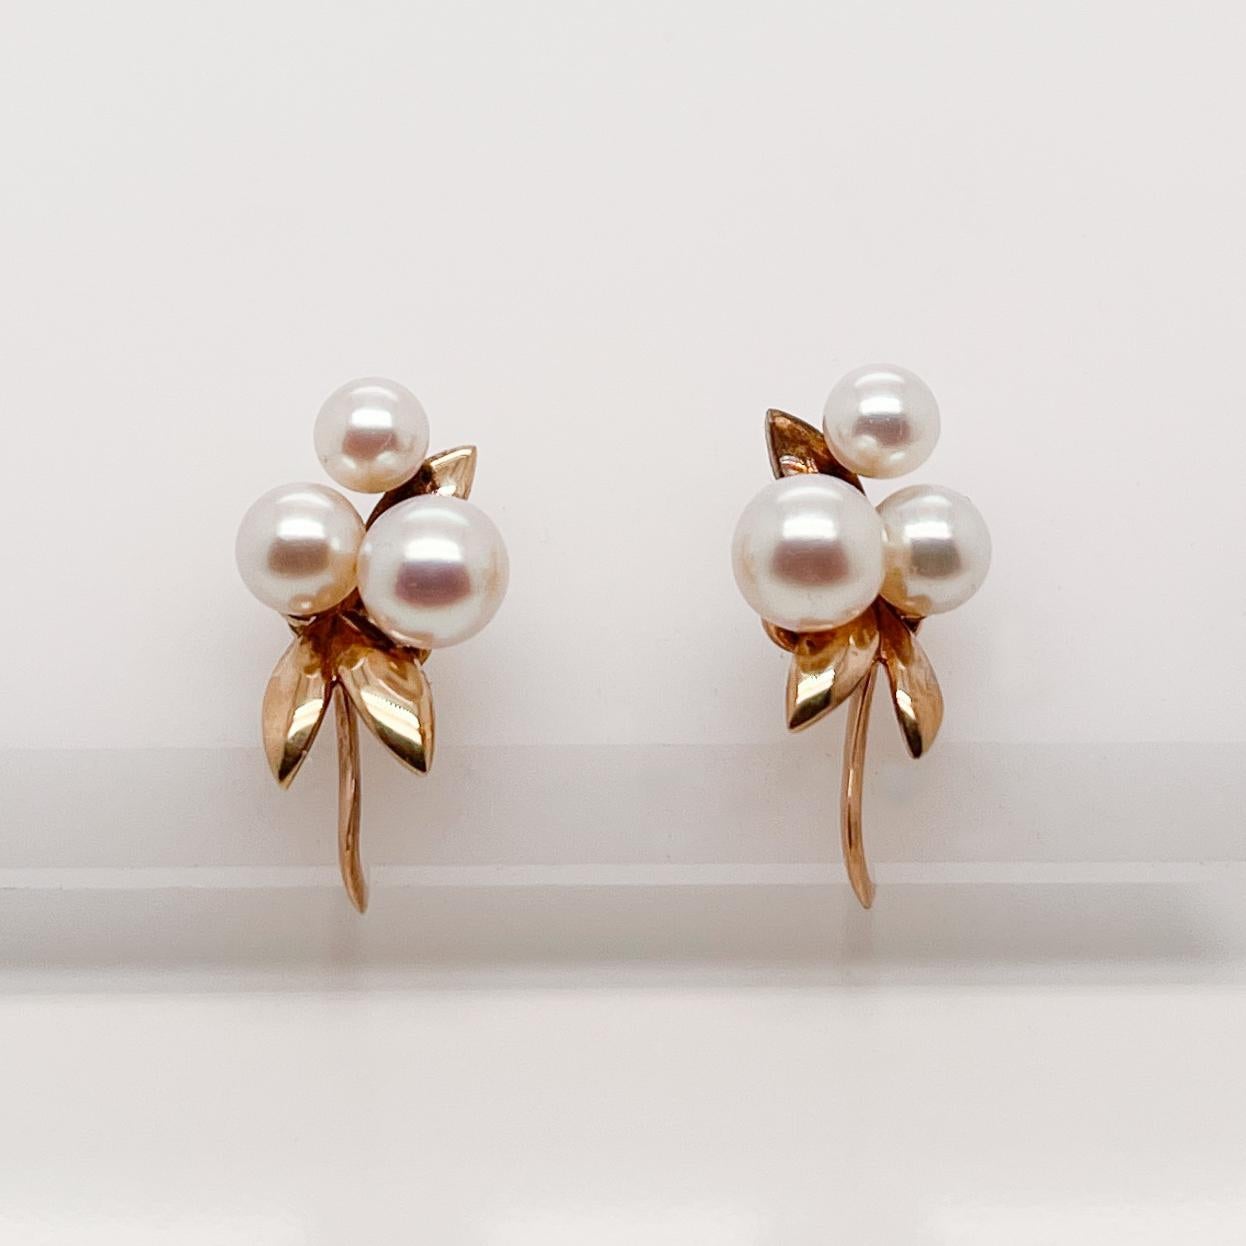 A very fine pair of 14K gold Tasaki Akoya pearl screw-back earrings.

With graduated round white pearls in a cluster set on 14k gold post with gold leaves. 

Simply a wonderful pair of earrings!

Date:
20th Century

Overall Condition:
It is in